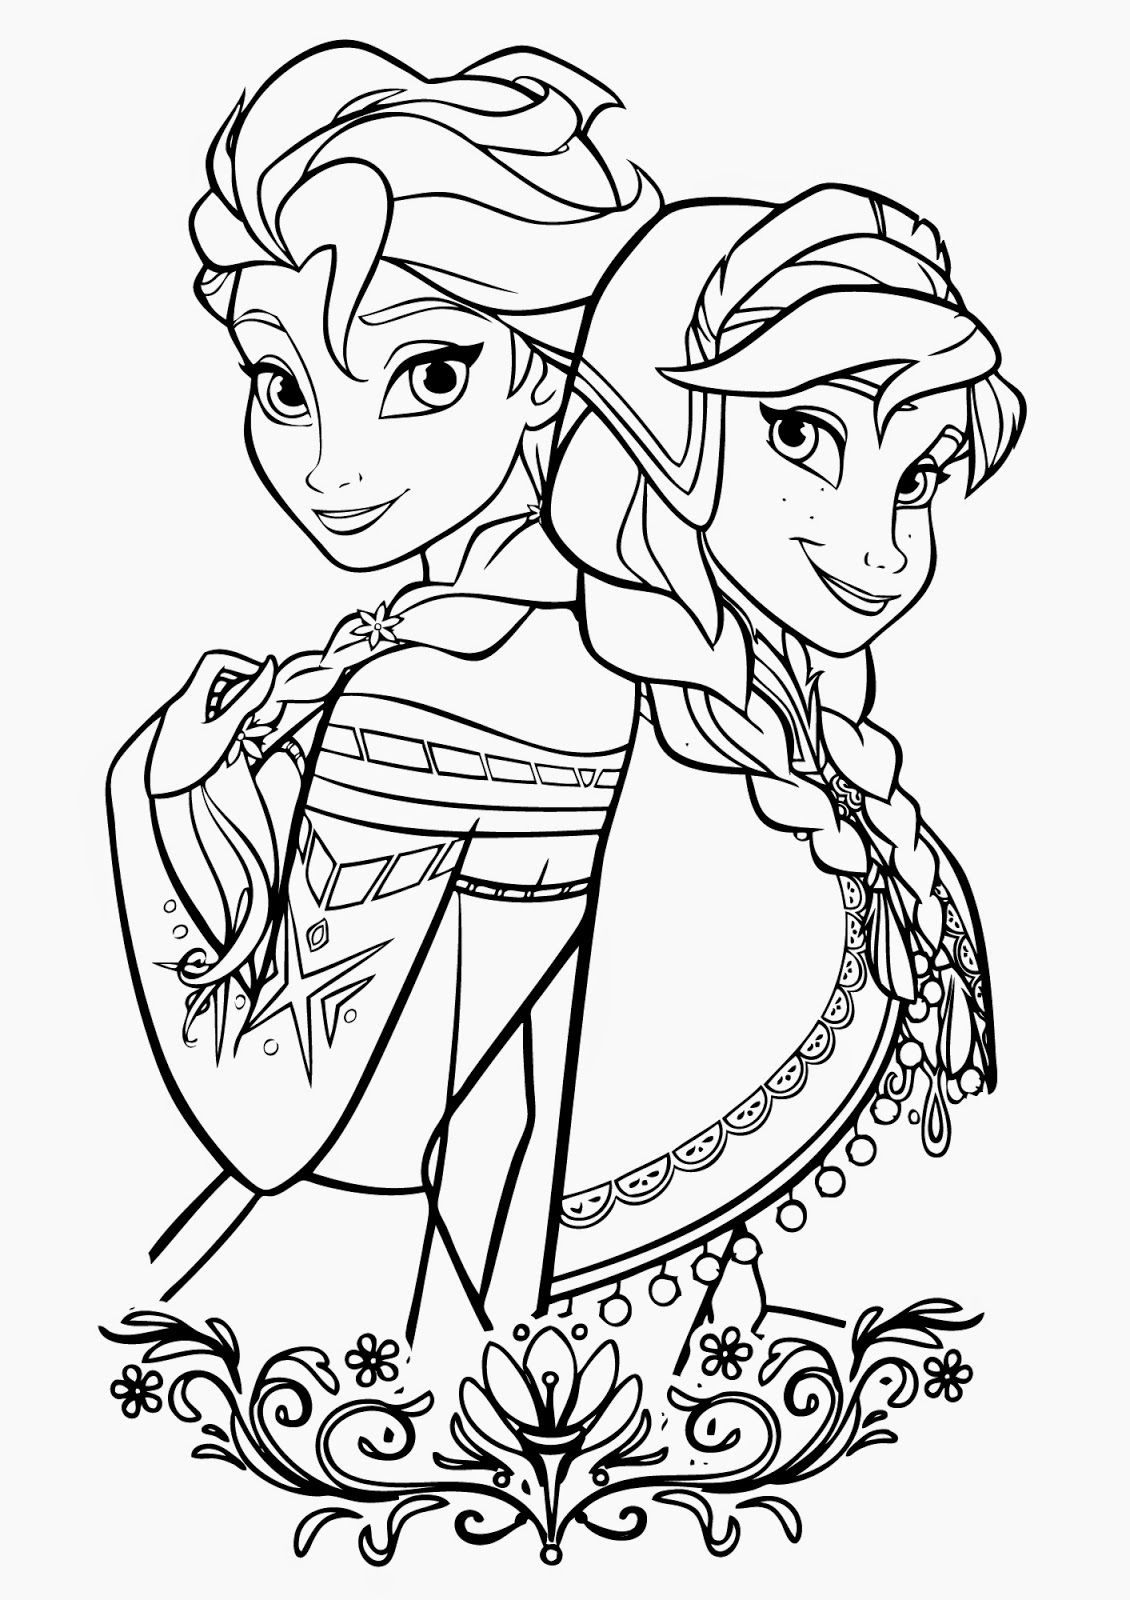 Find 15 beautiful Frozen Disney Coloring Pages free with all ...